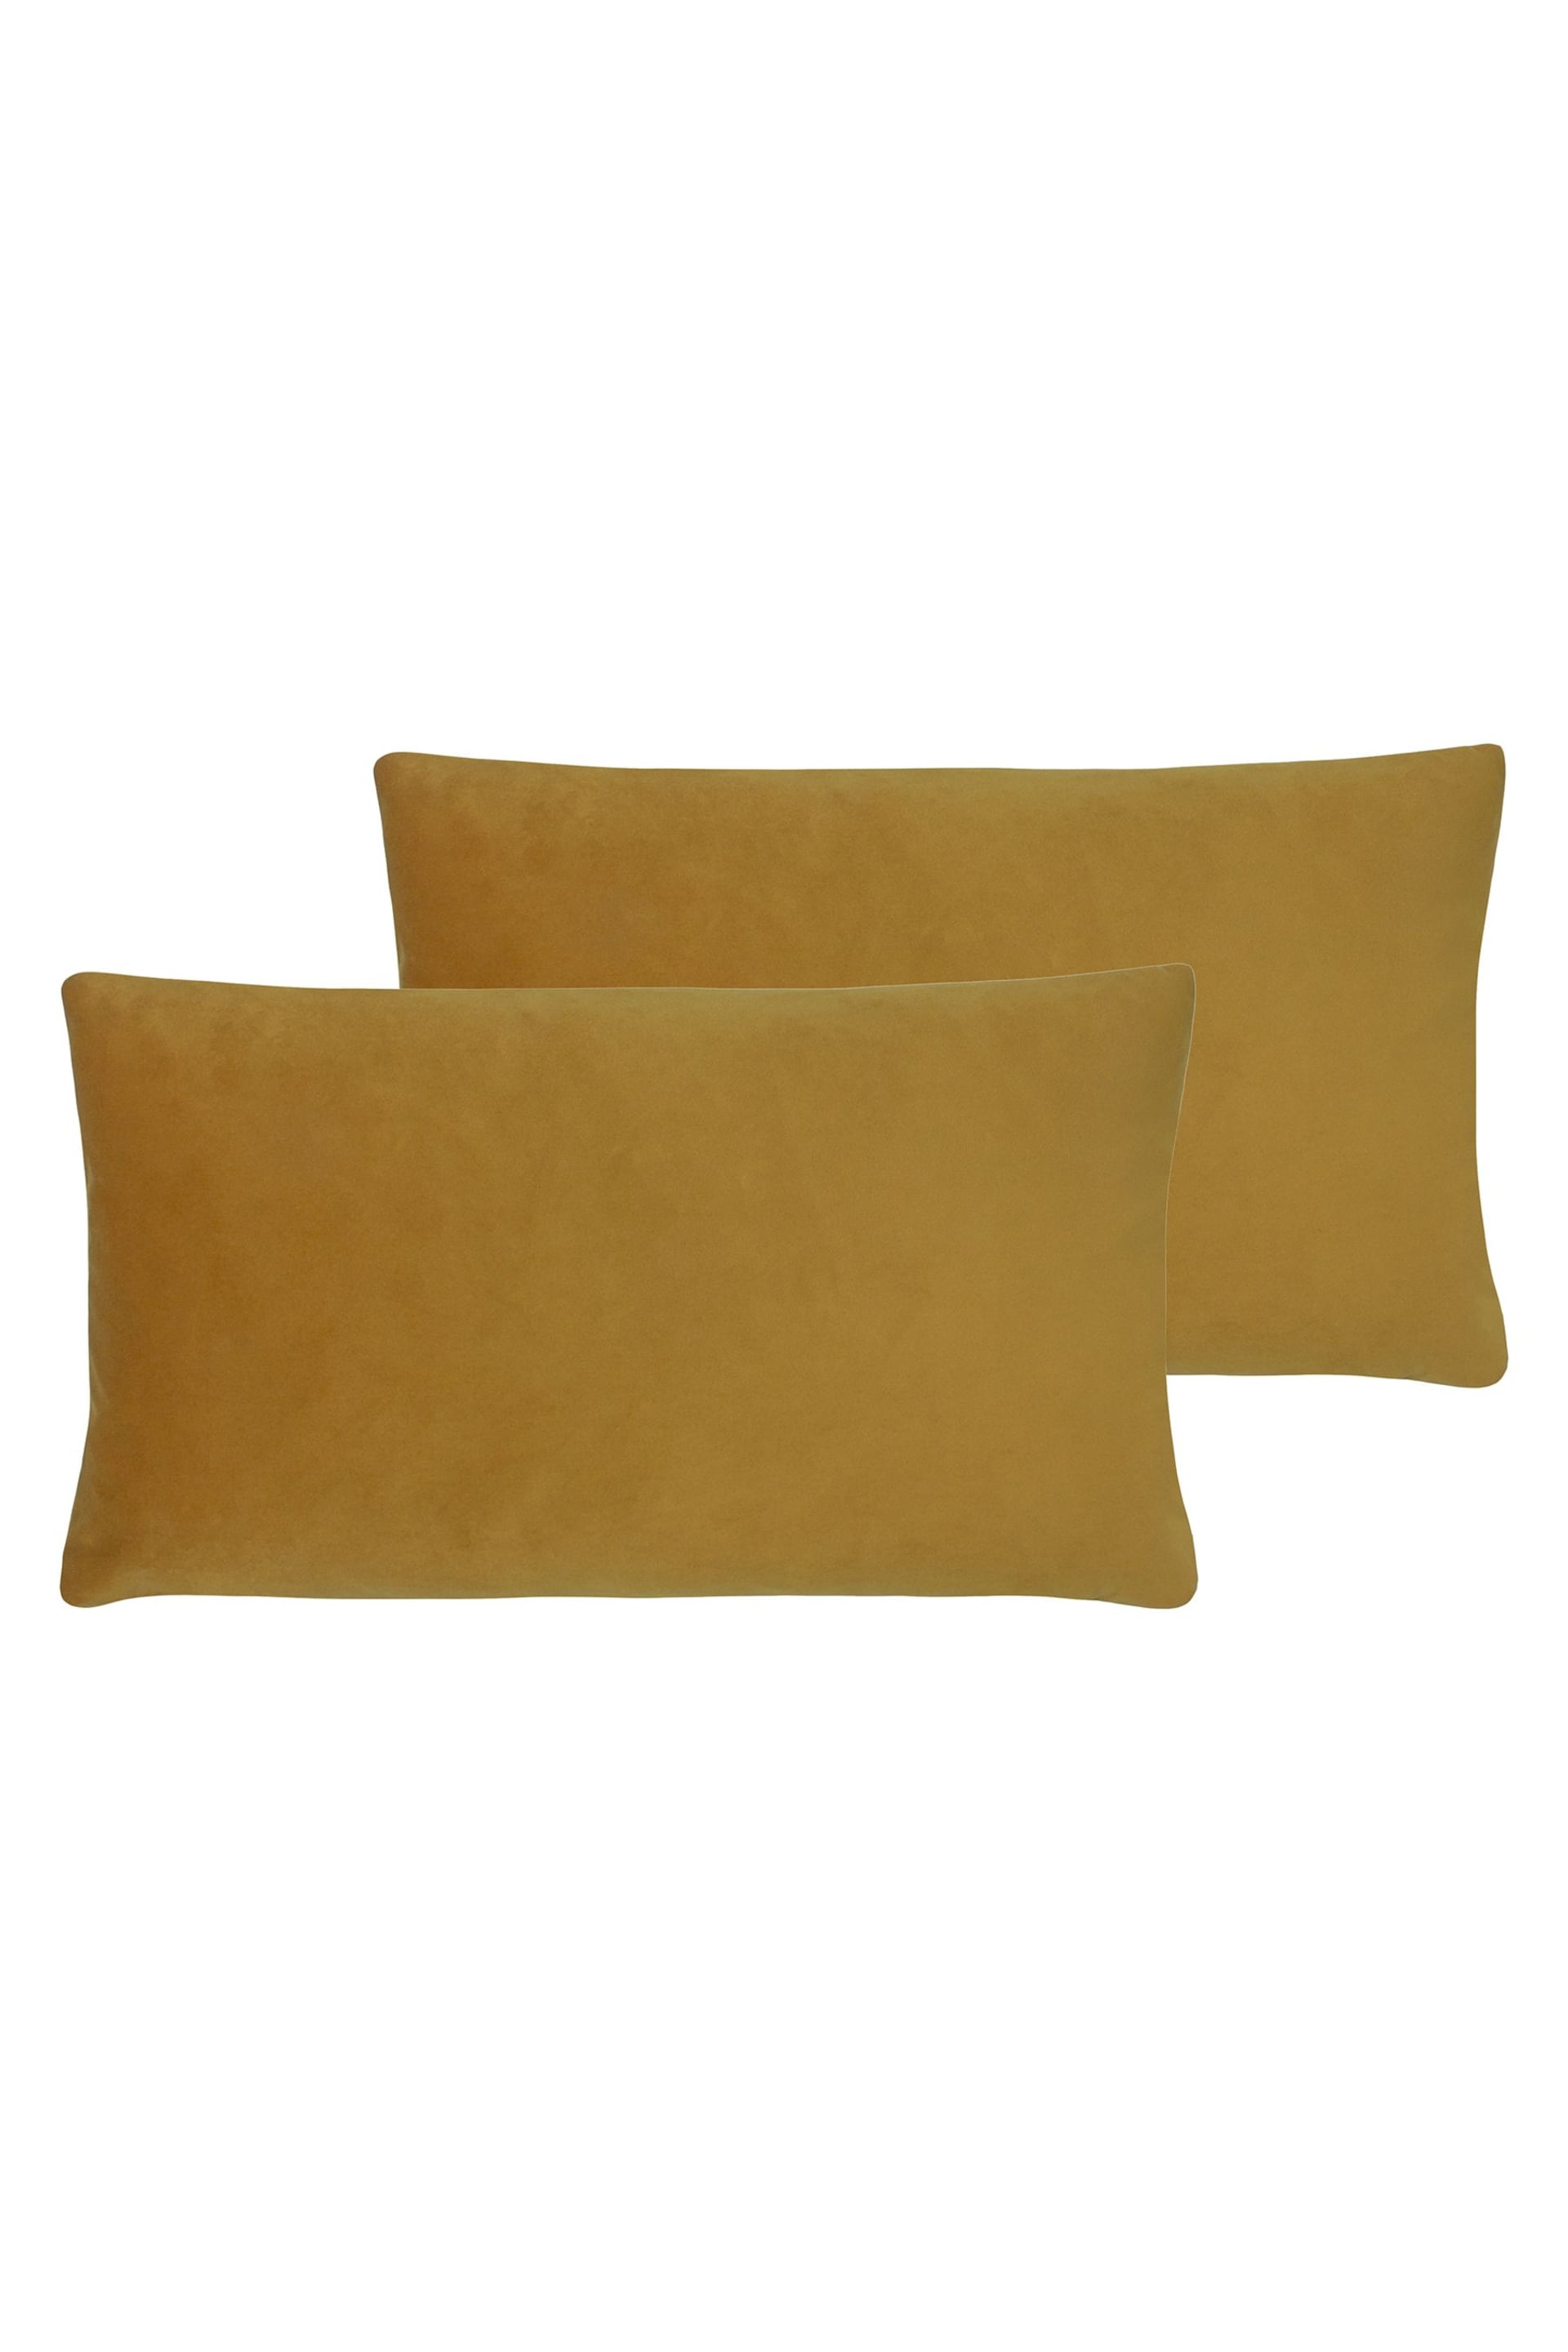 Riva Paoletti 2 Pack Yellow Sunningdale Filled Cushions - Image 1 of 3